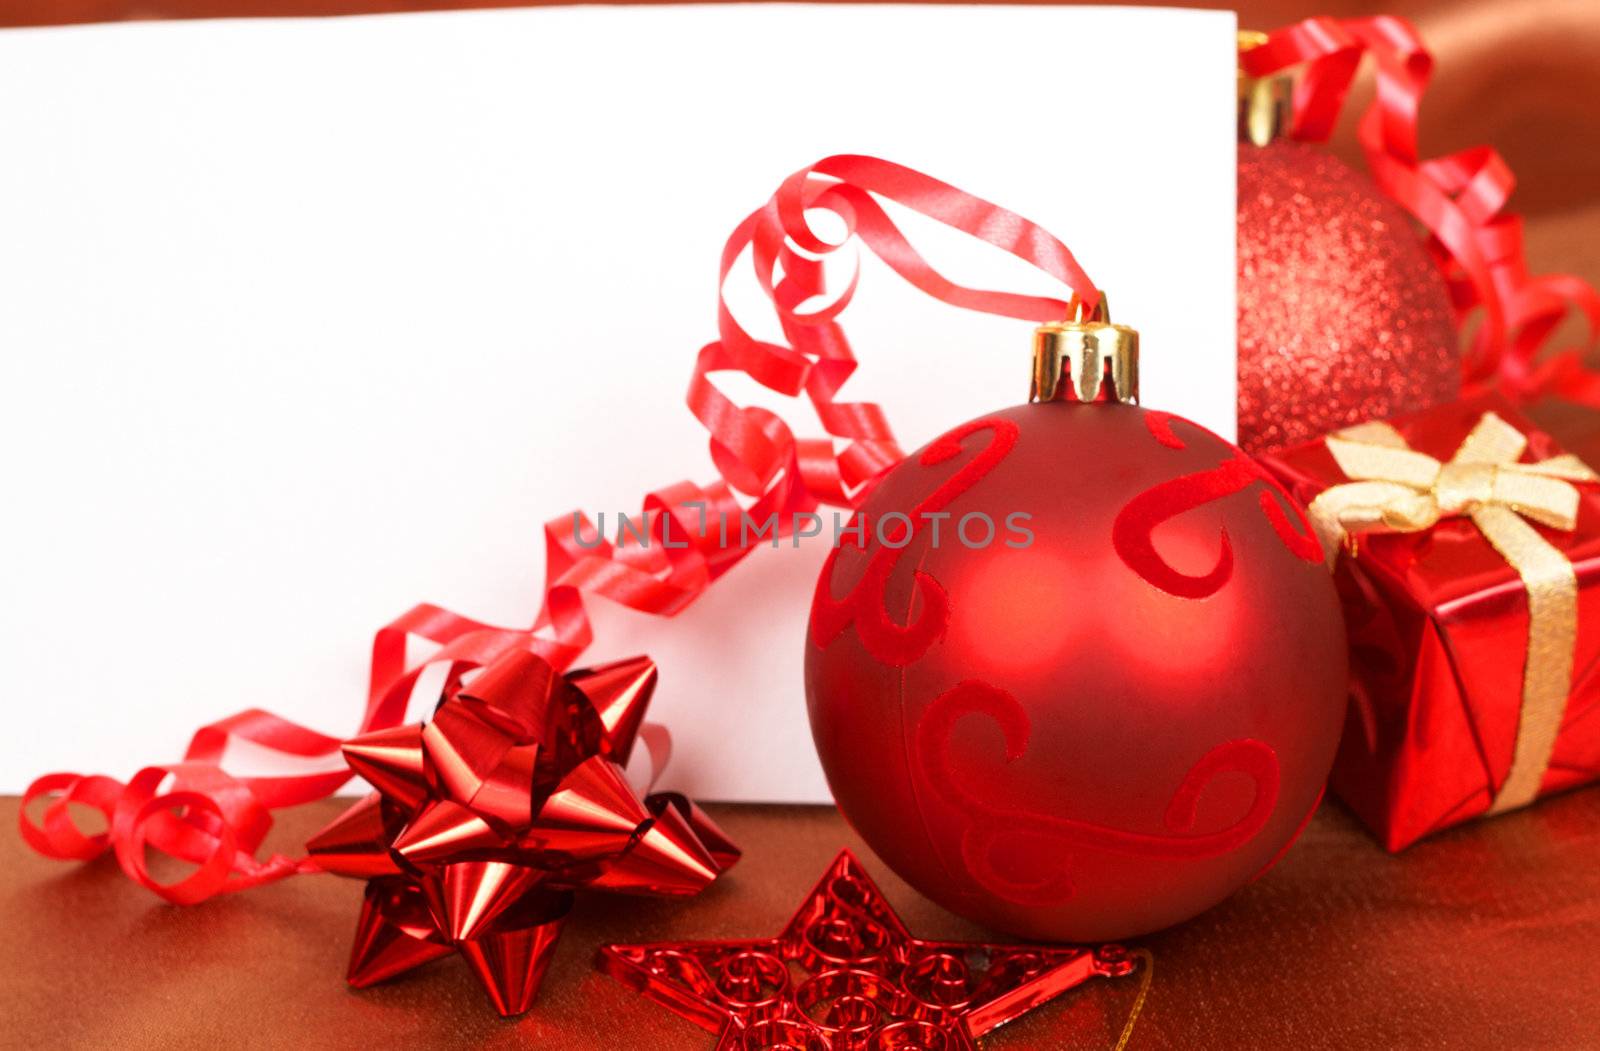 Red Christmas decorations and card by Elenat